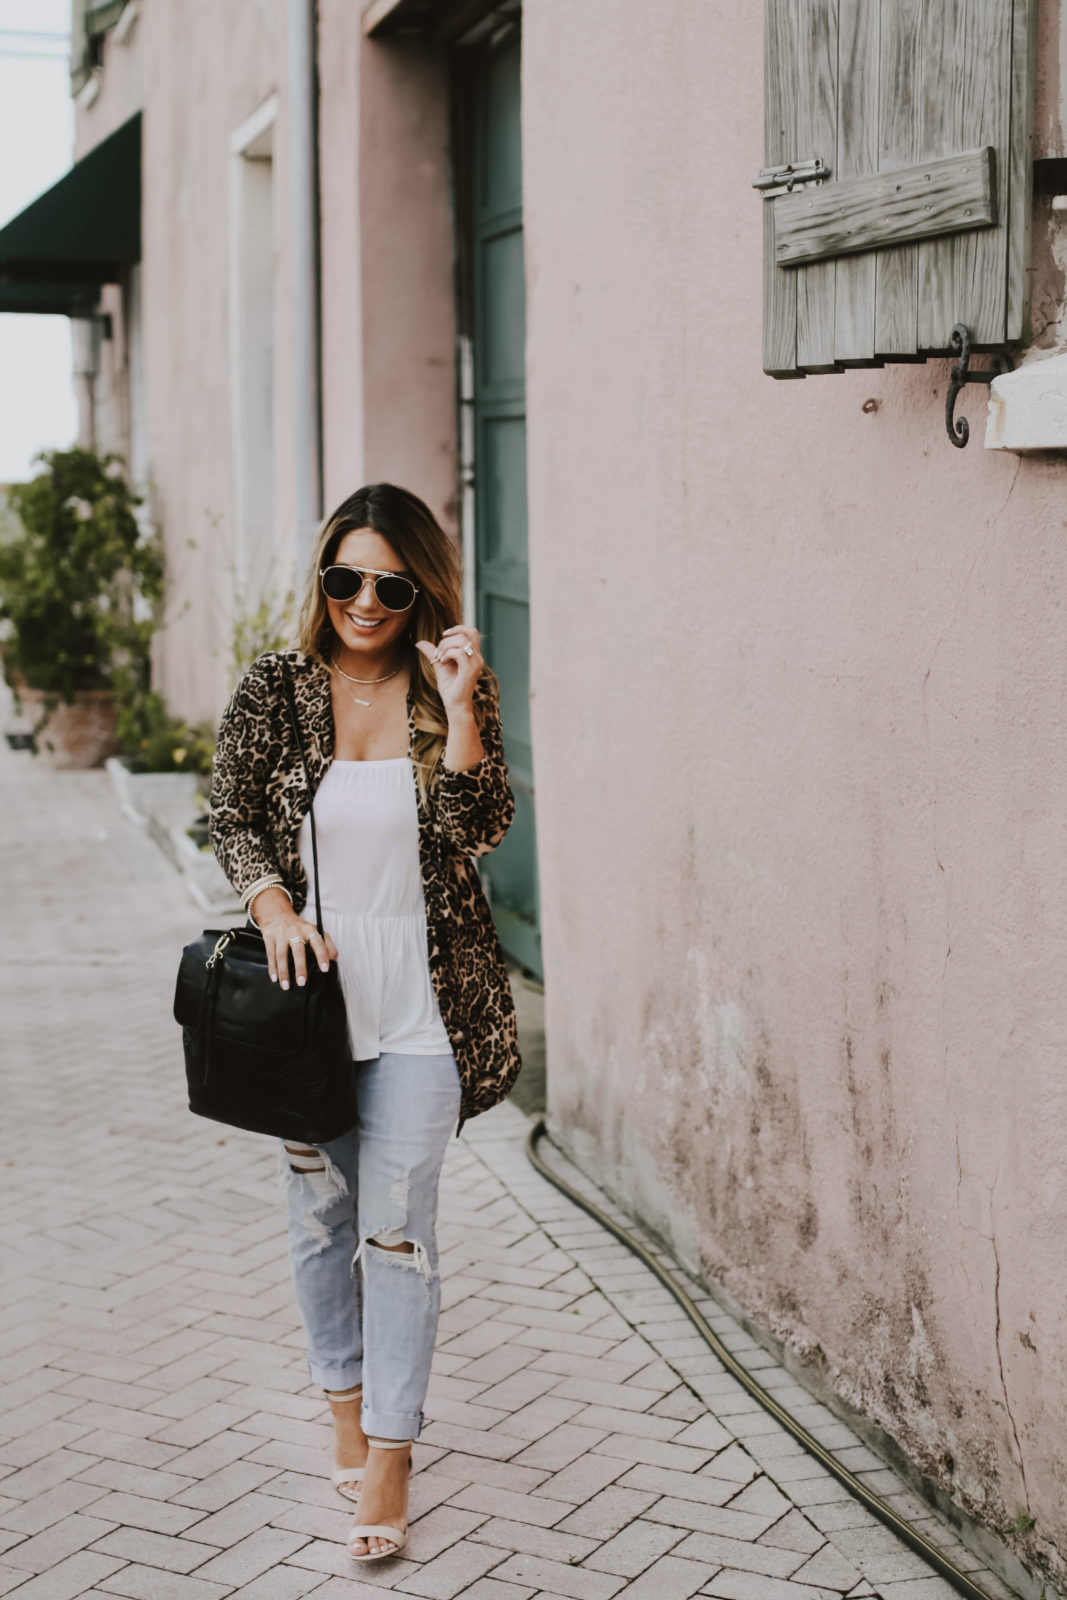 Transition into Fall with this Leopard Cardigan - Dashing Darlin'